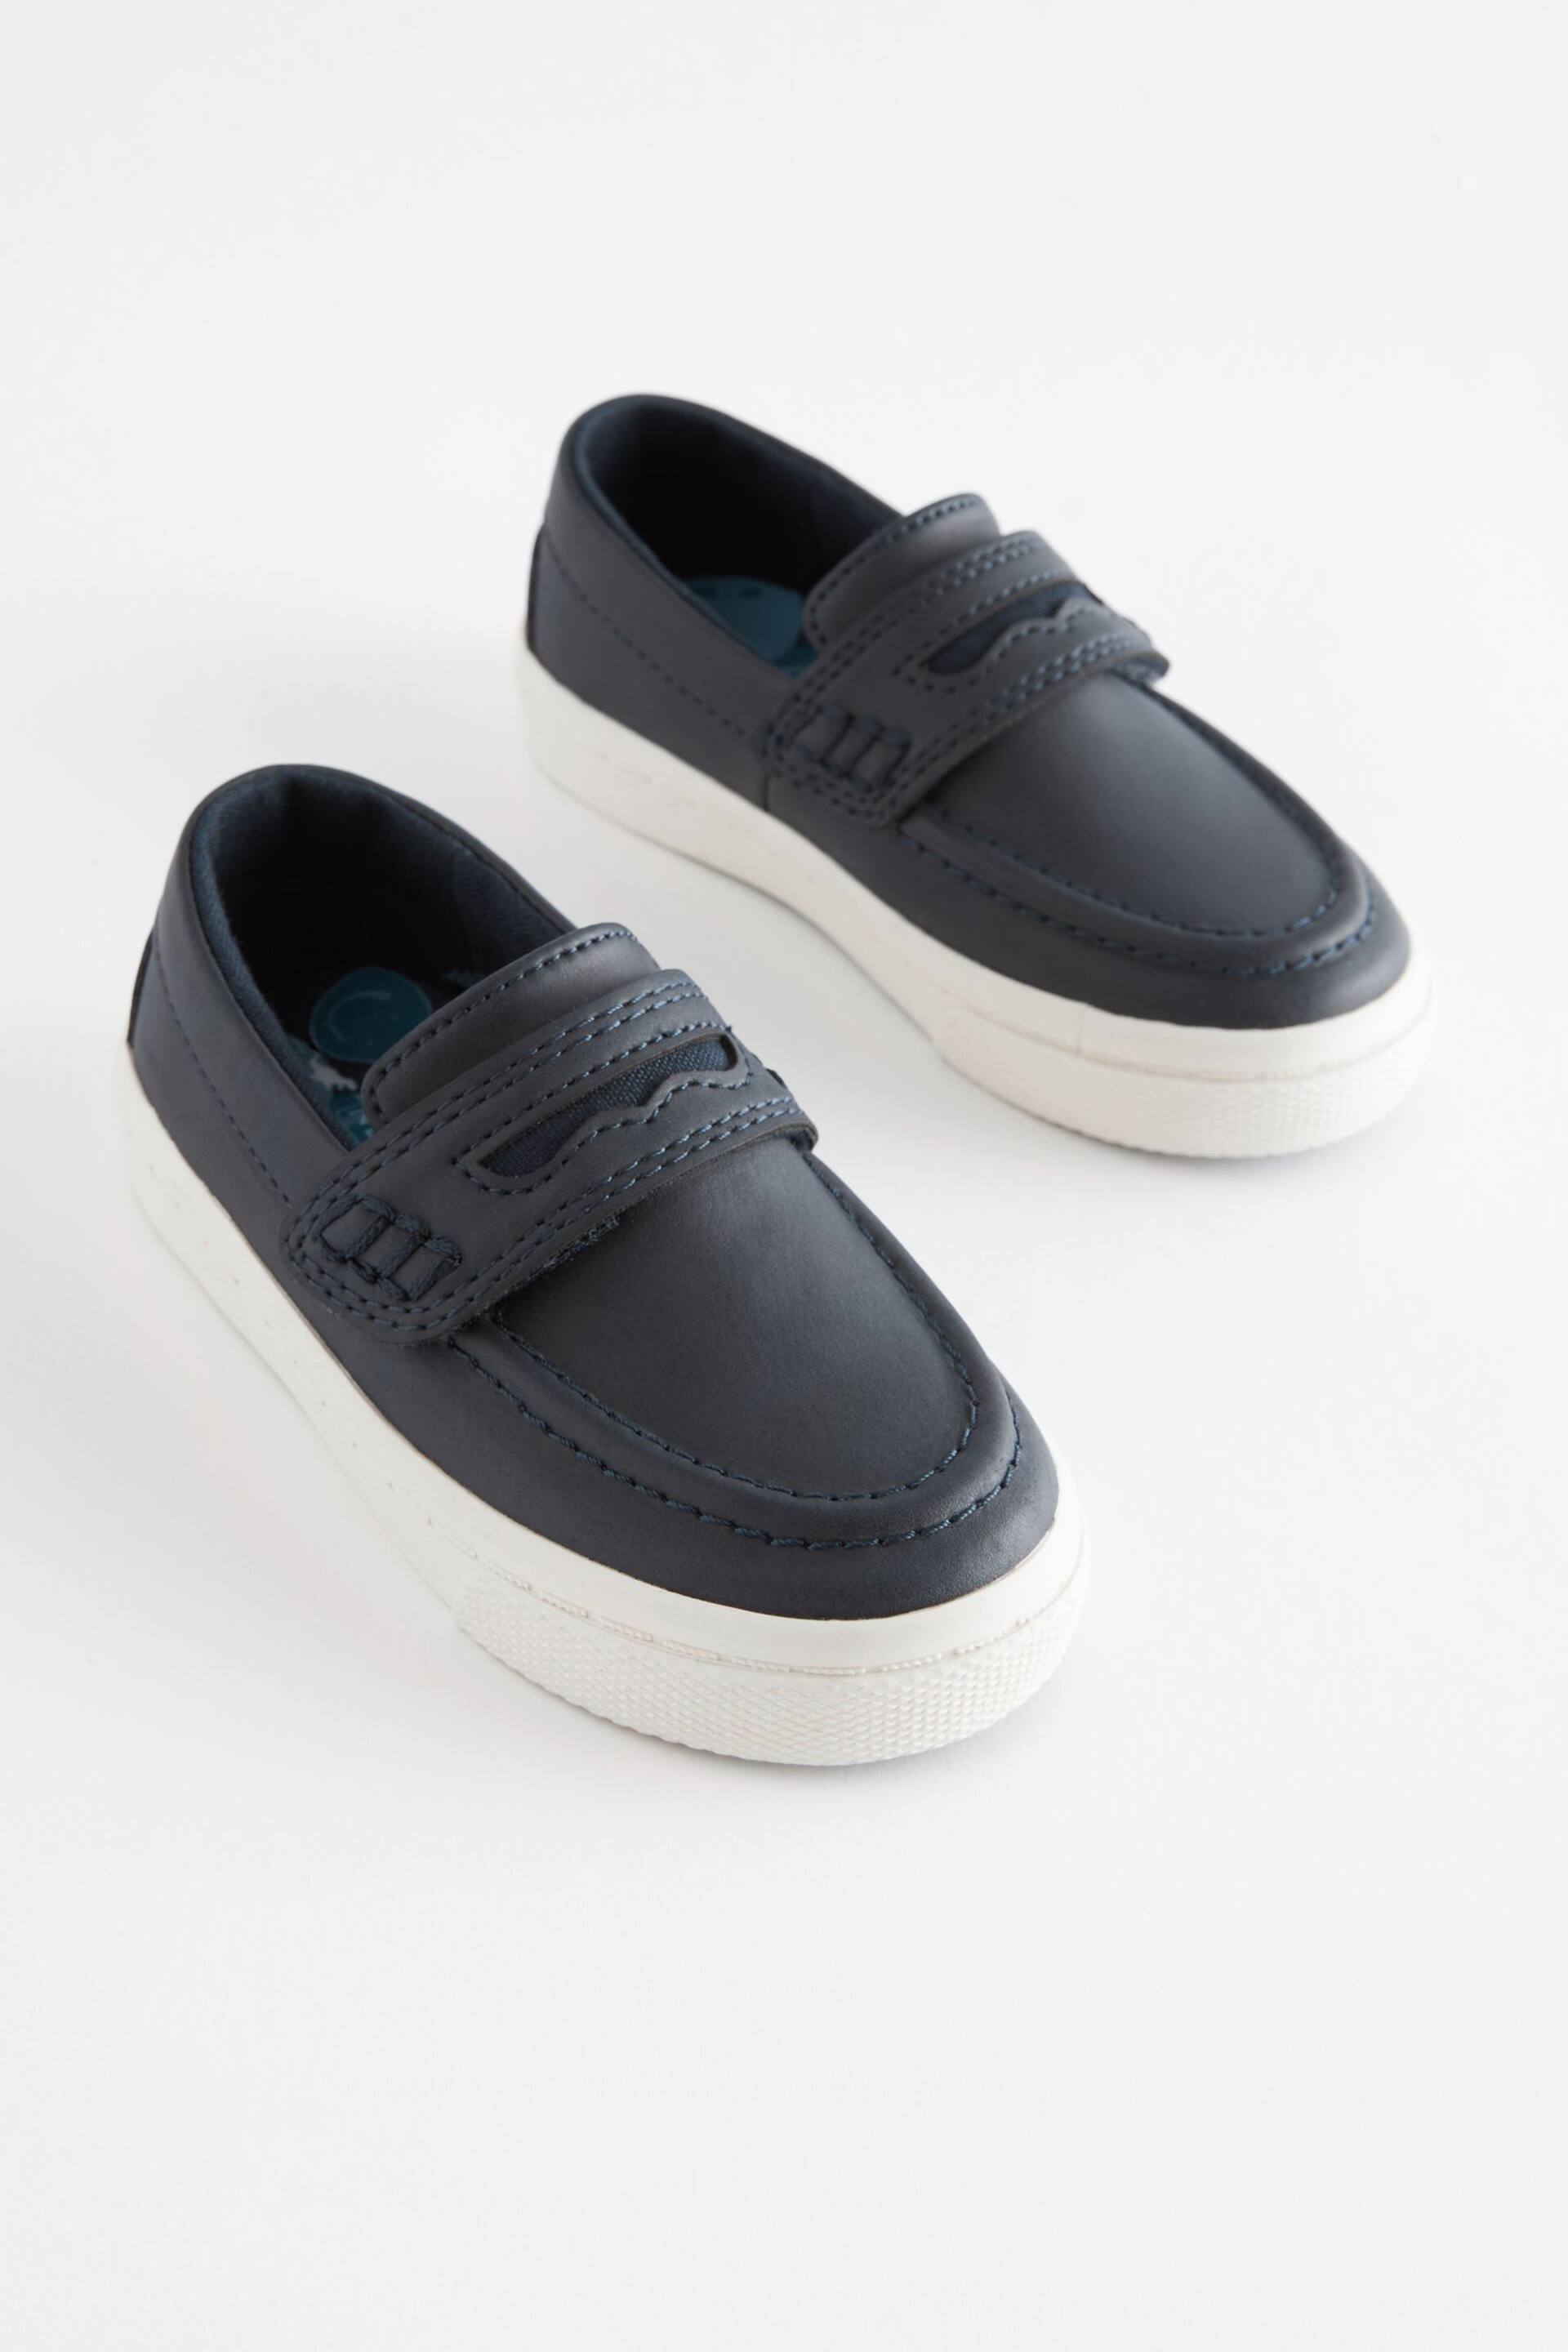 Navy Wide Fit (G) Penny Loafers - Image 3 of 6